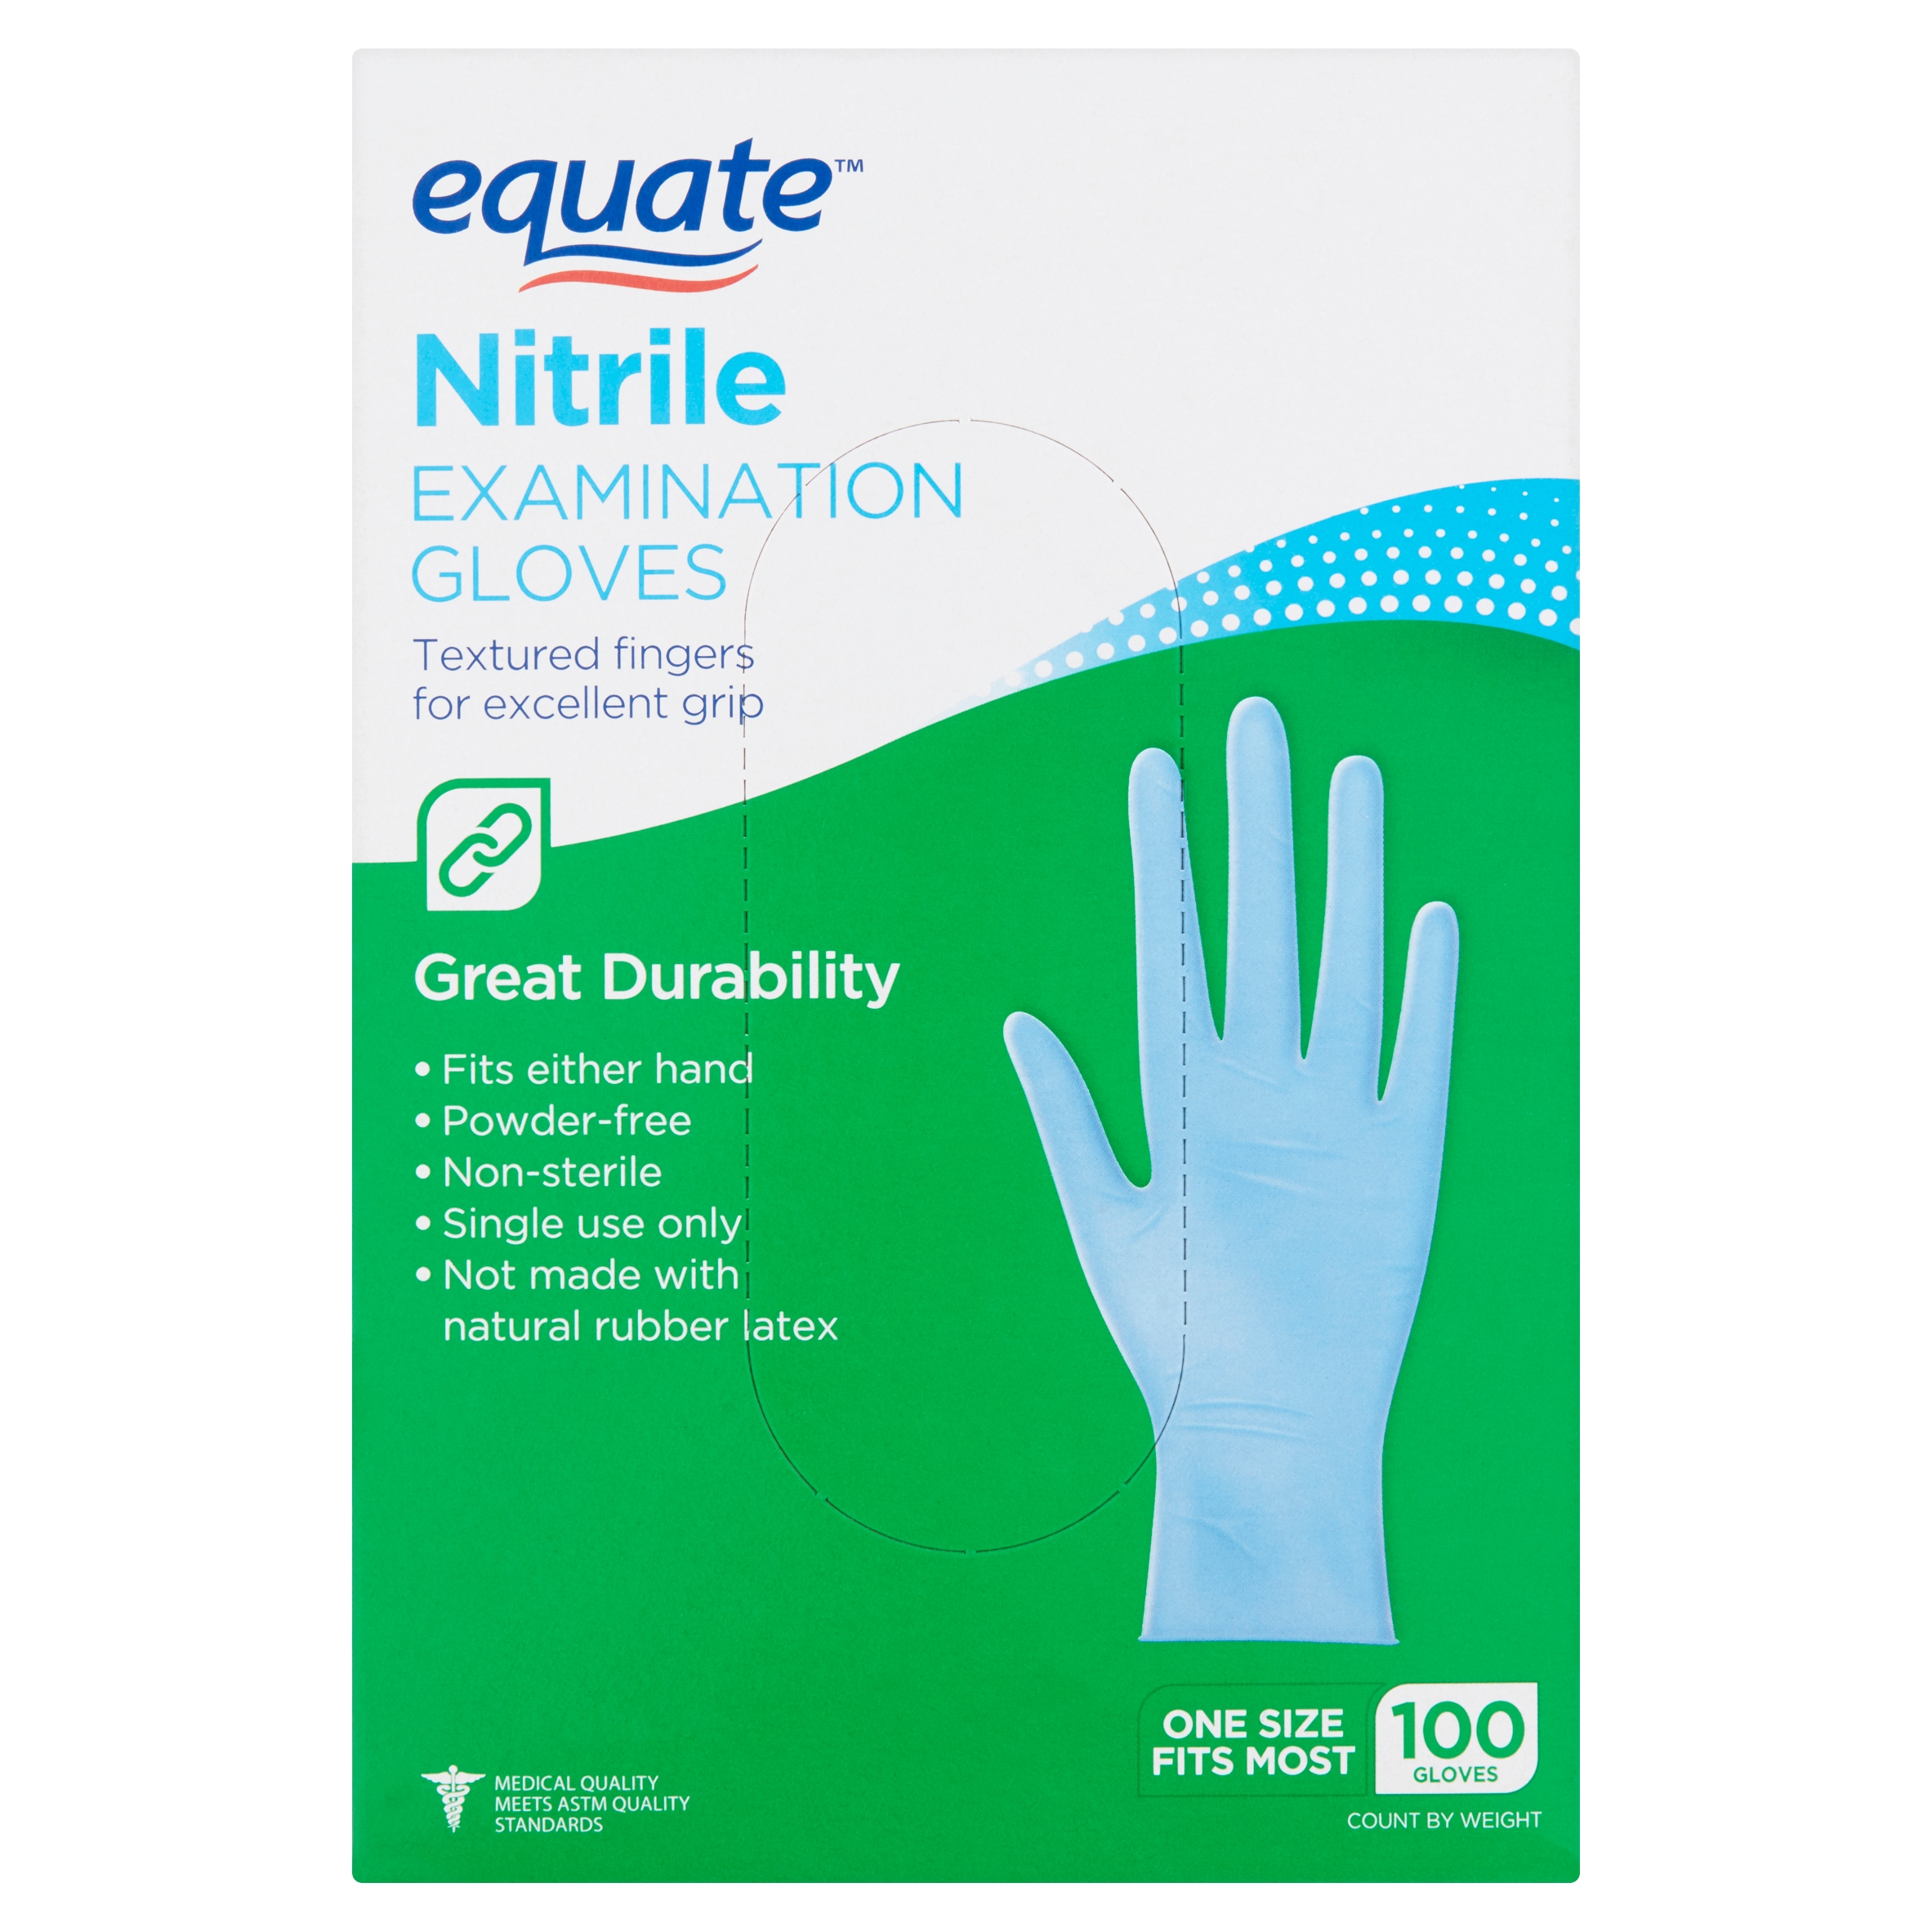 Equate Nitrile Examination Gloves, 100 count - image 3 of 10